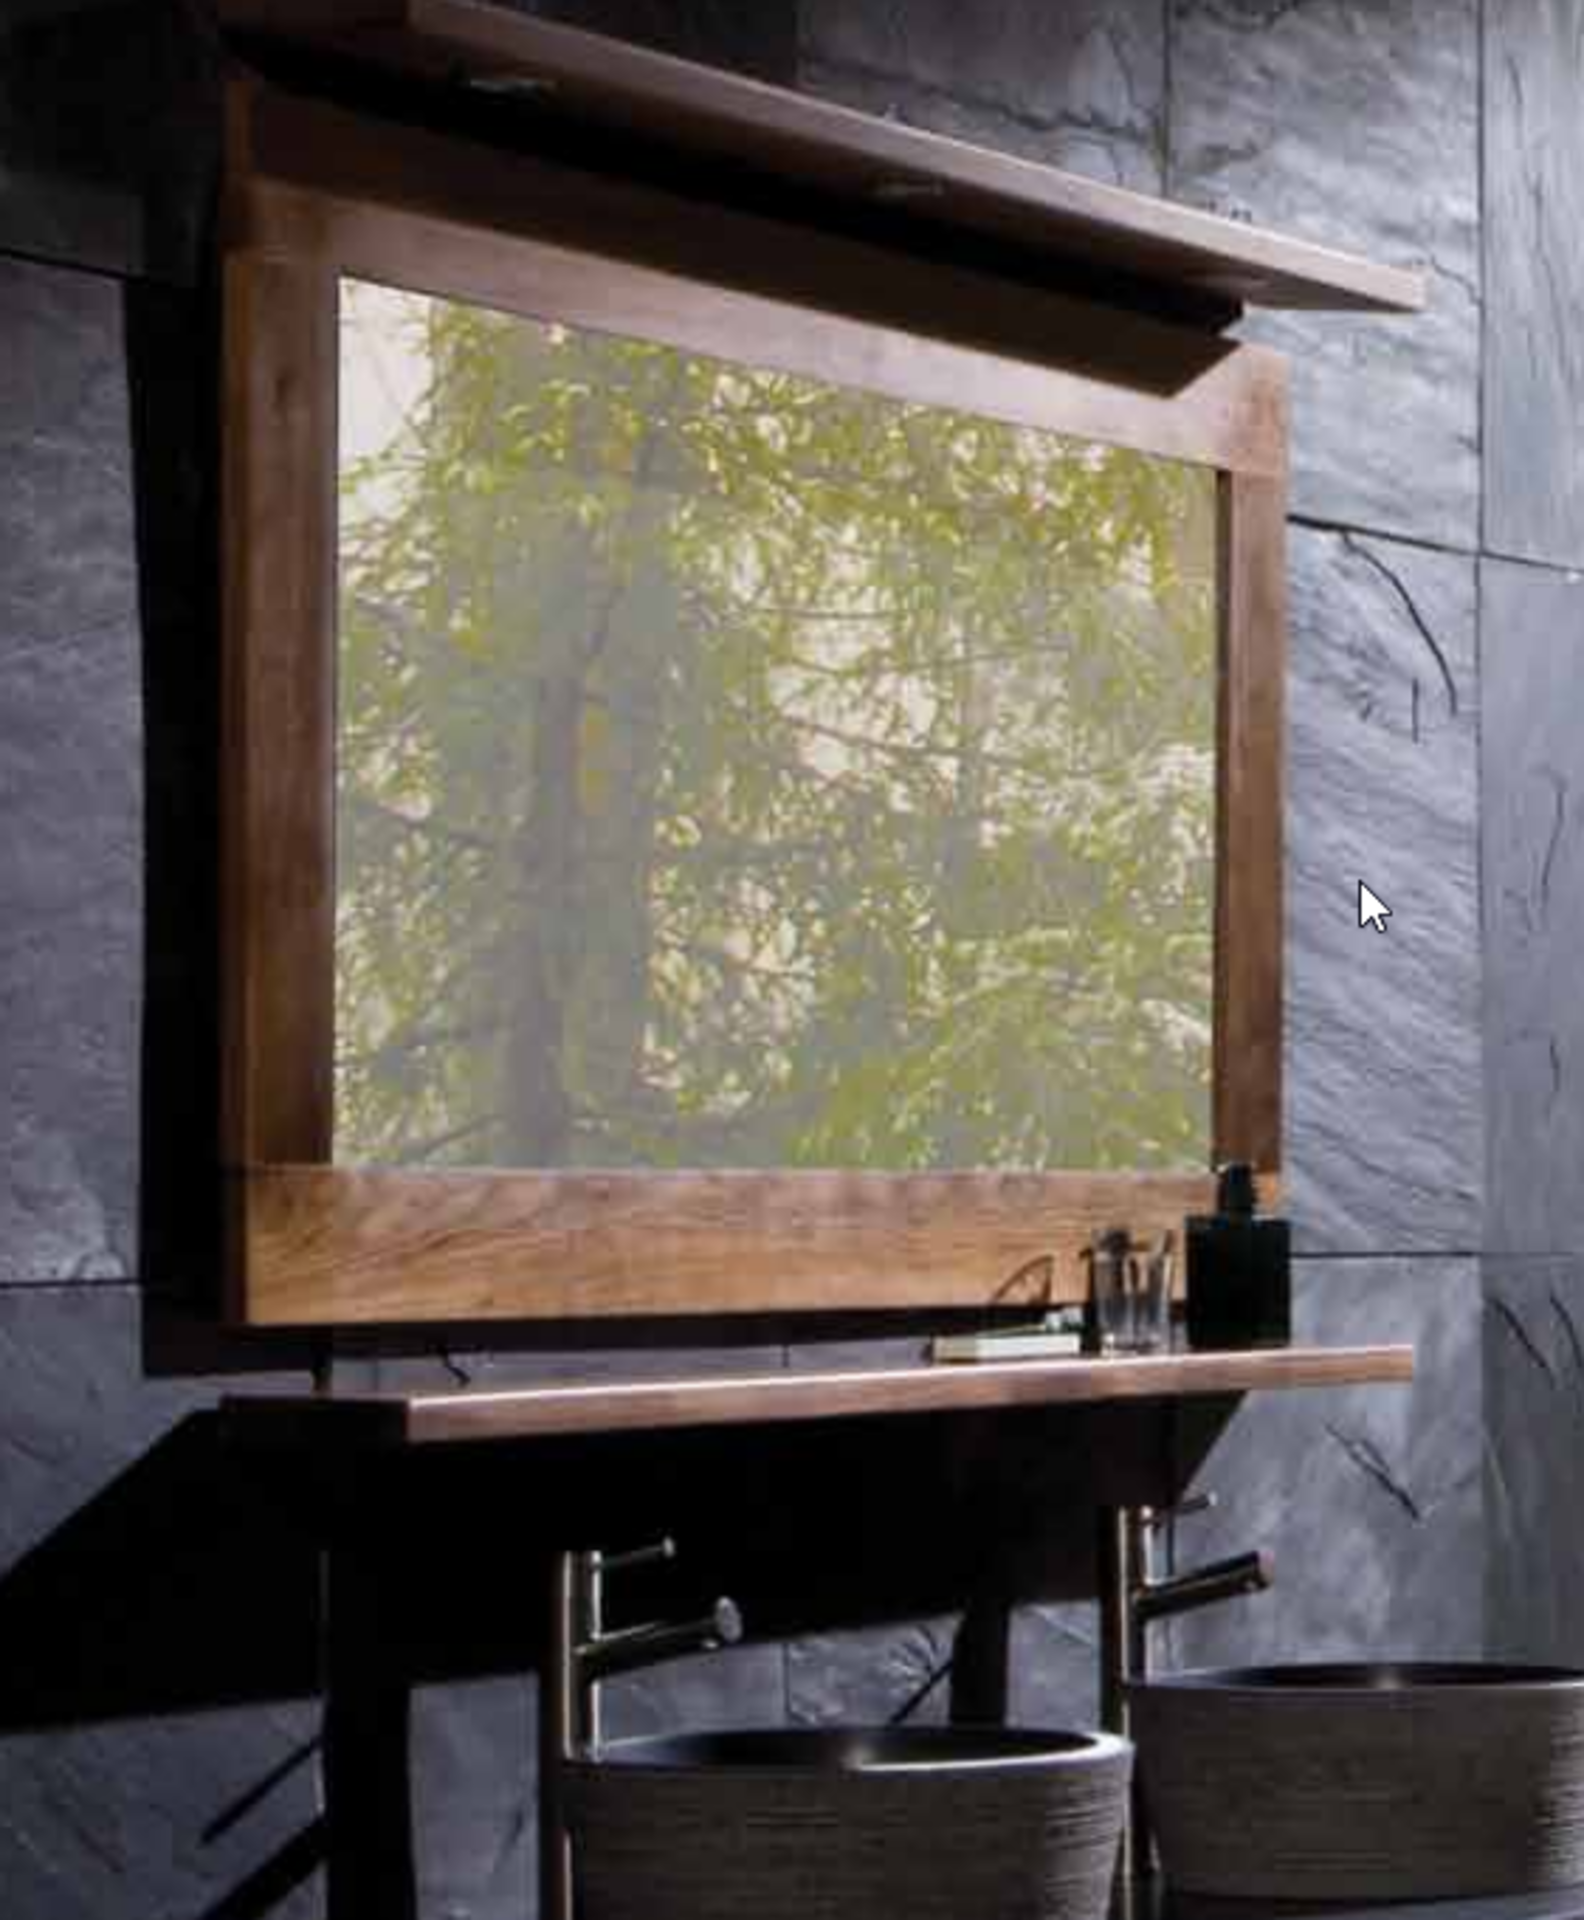 1 x Stonearth Bathroom Wall Mirror With Solid Walnut Frame and Bevelled Glass Mirror - Size: Large - Image 5 of 11